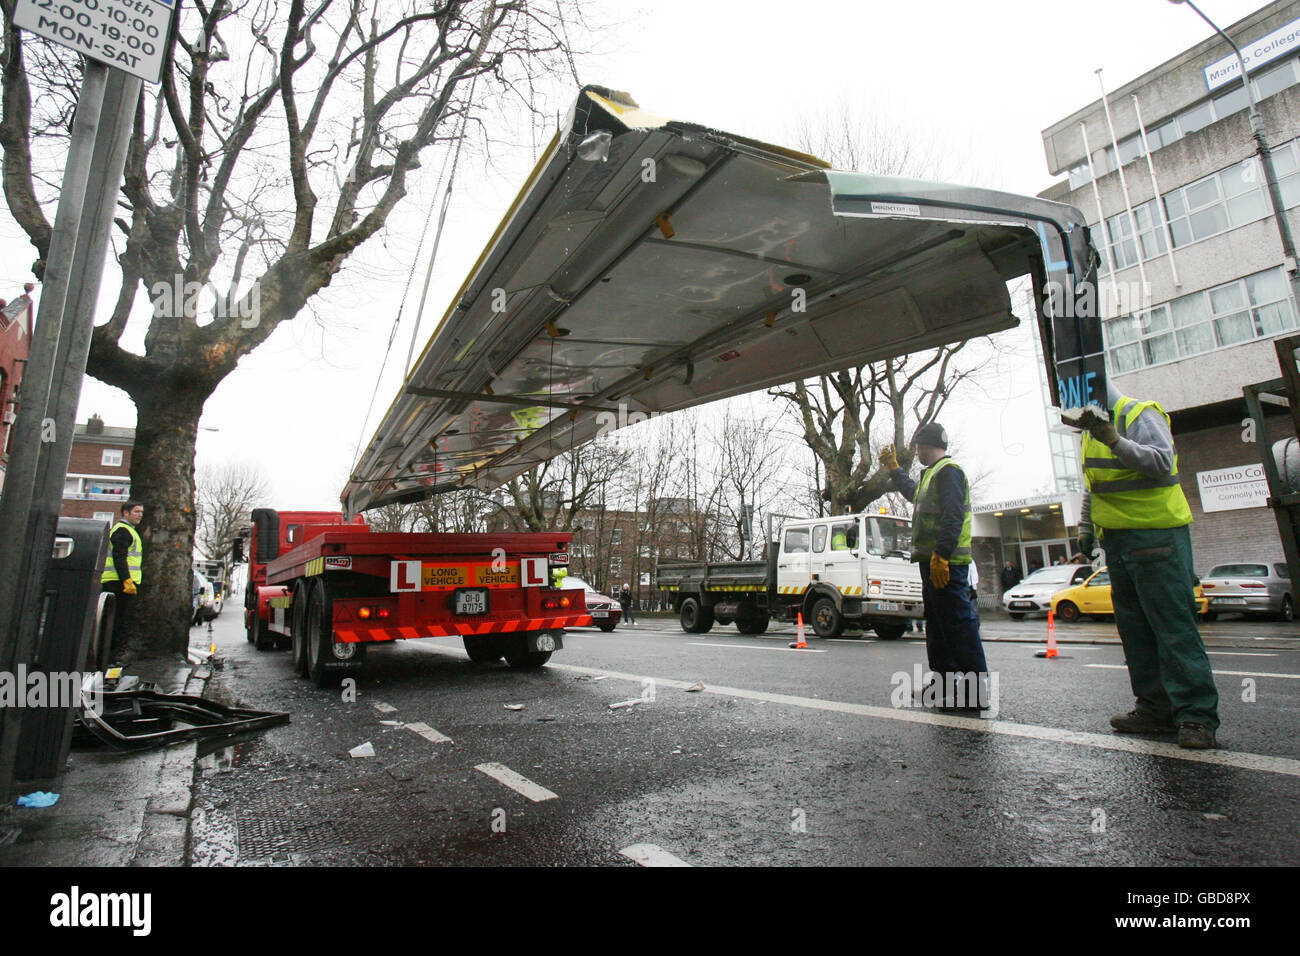 Dublin Bus engineers recover the roof of a double decker bus which crashed into a tree on Dublin's North Strand this morning. Stock Photo